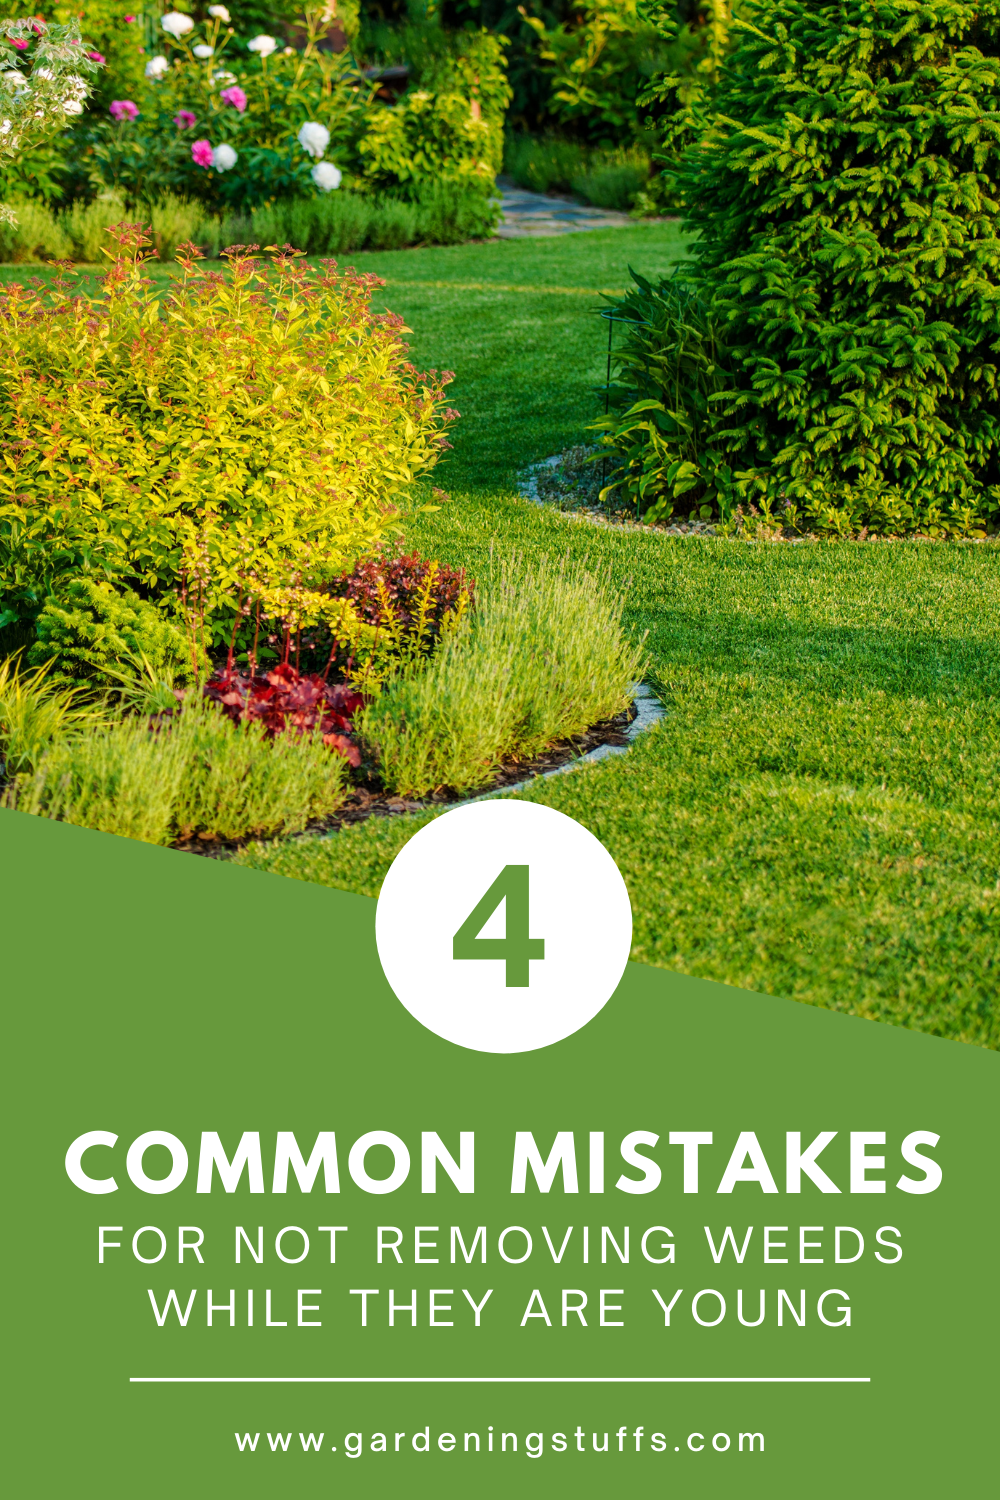 Weeds grow just like any other plants; therefore, when these weeds are young, inspect your garden regularly. Read on to know how to get rid of garden weeds and the common mistakes to avoid when the weeds are young.